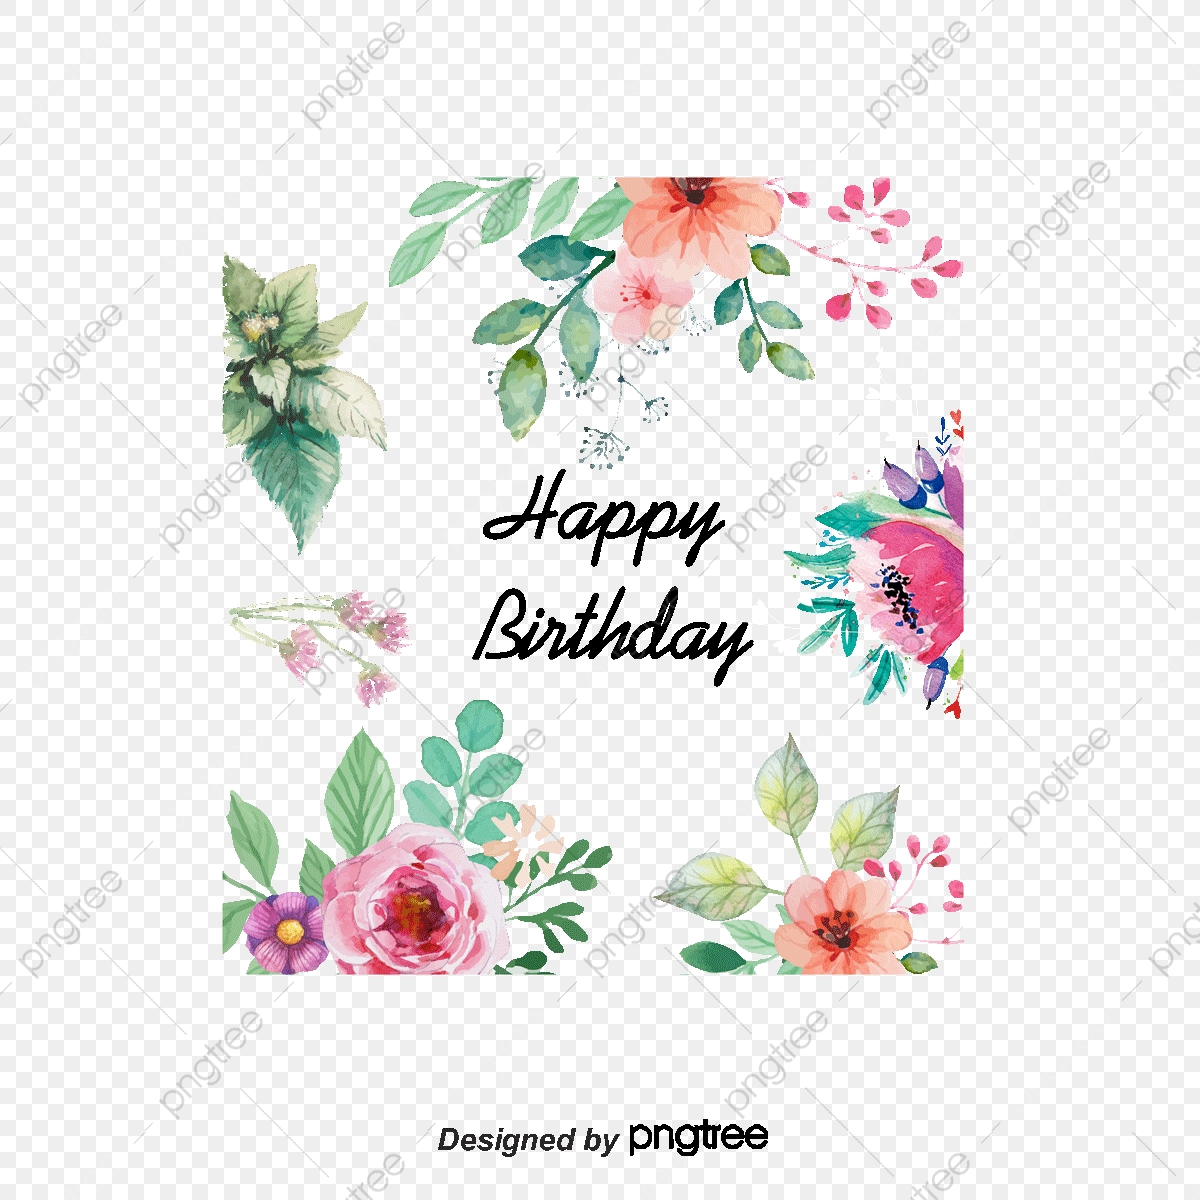 Vector Flowers Greeting Cards, Watercolor Style Flowers, Birthday.